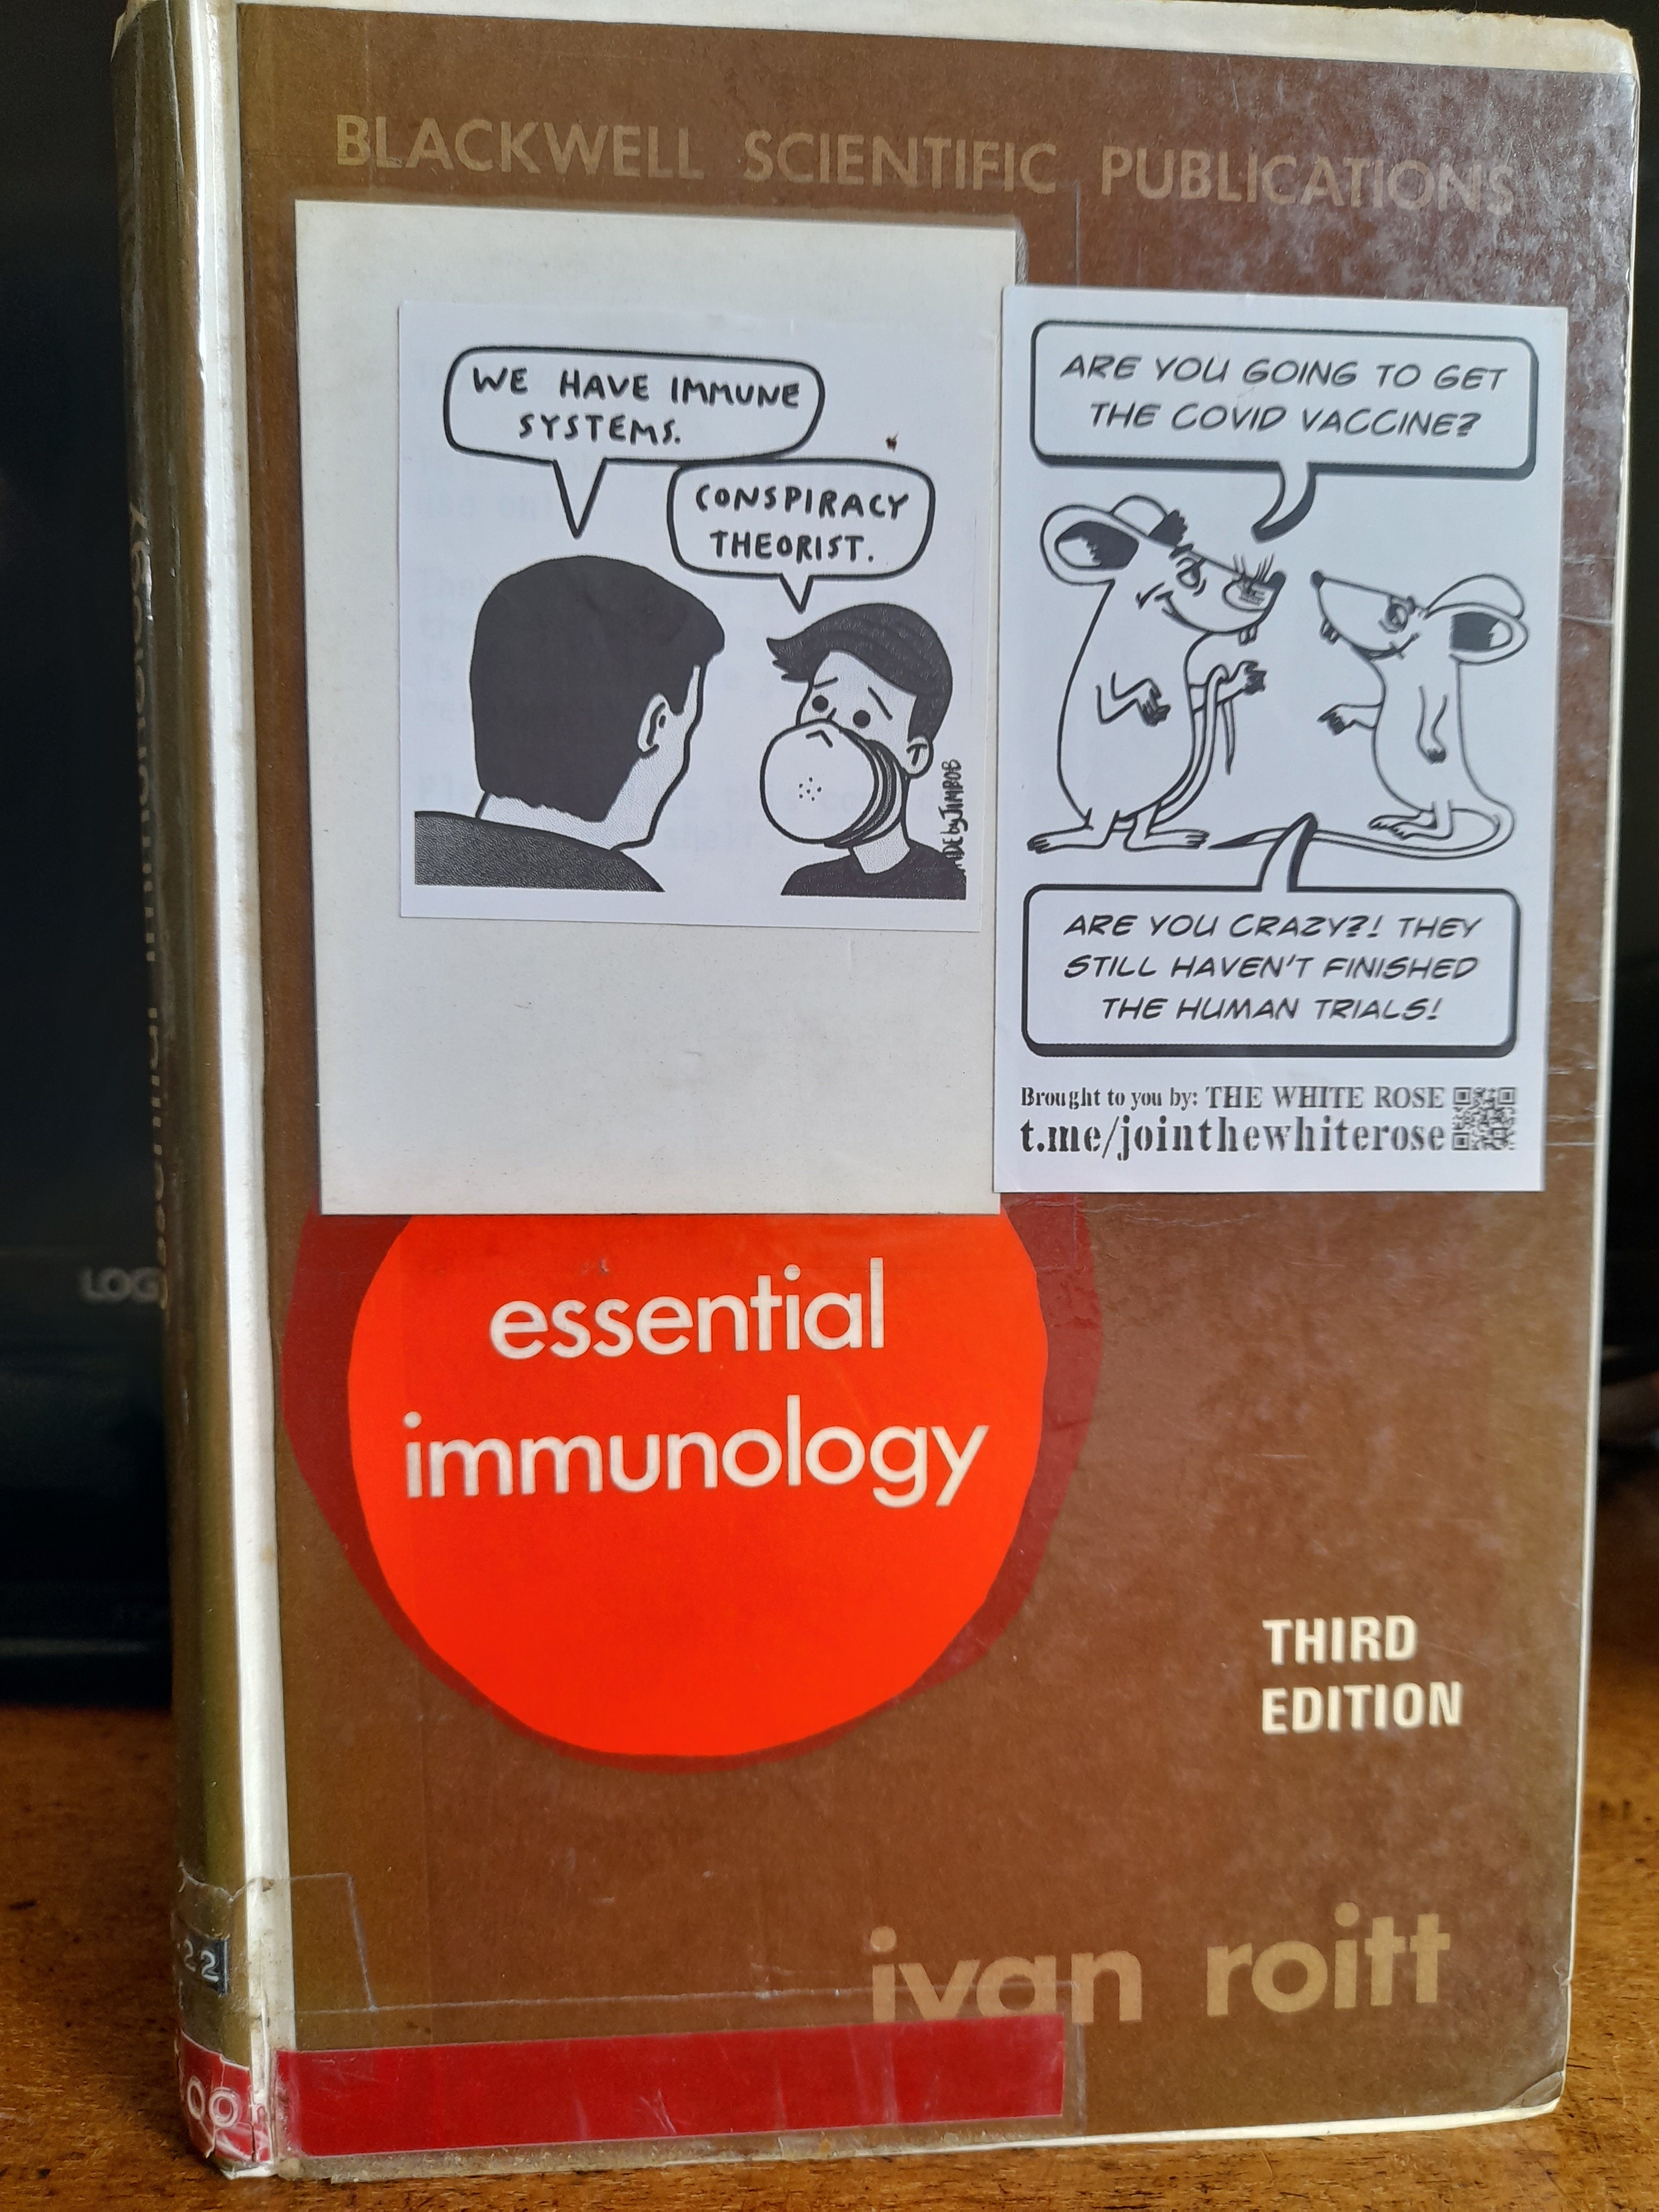 Essential Immunology - we have immune systems